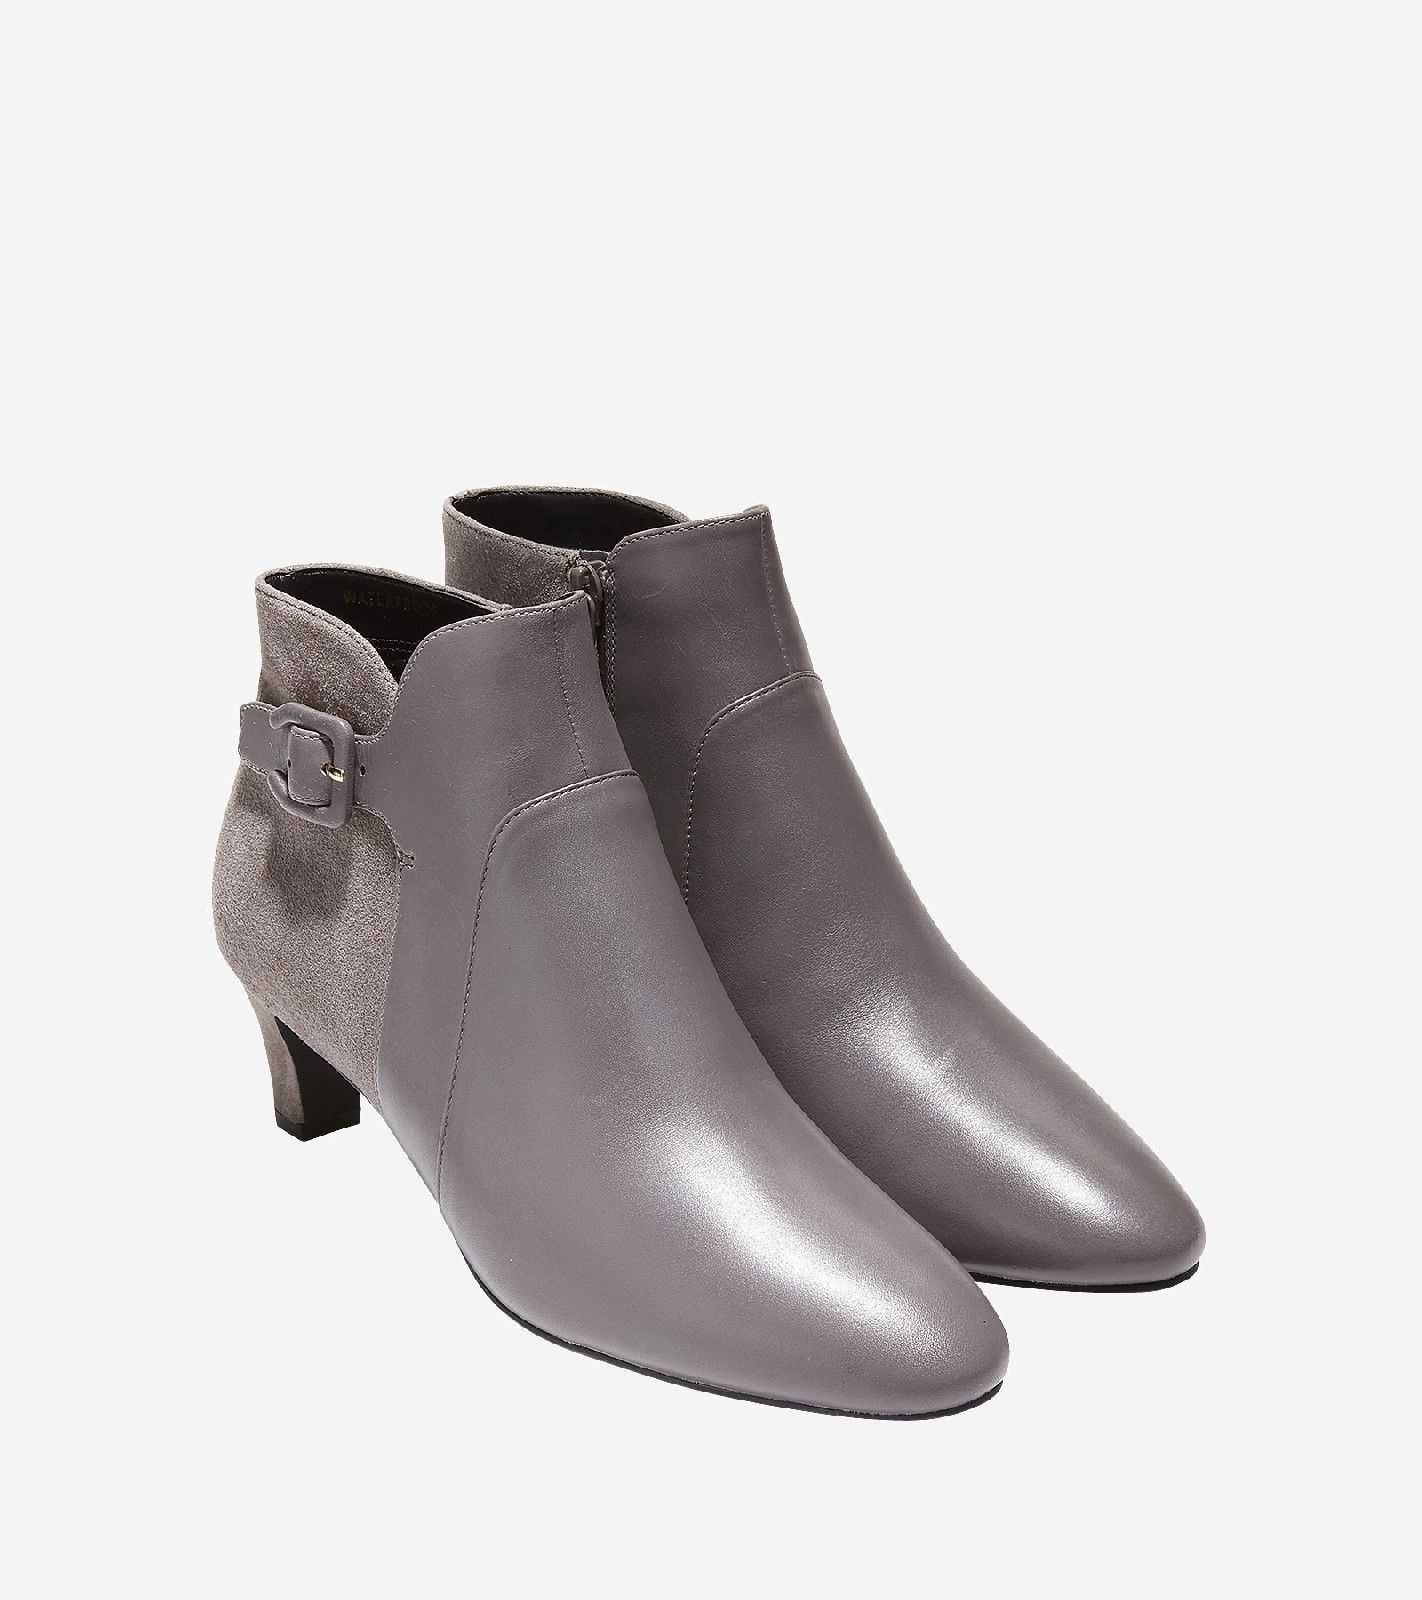 Put the bulky Wellies away and break out the waterproof Sylvia Bootie the next time it rains. This sleek yet streamlined style is crafted in waterproof suede and leather and features buckle detailing. WP leather and WP suede or printed haircalf upper with buckle detail and zipper..